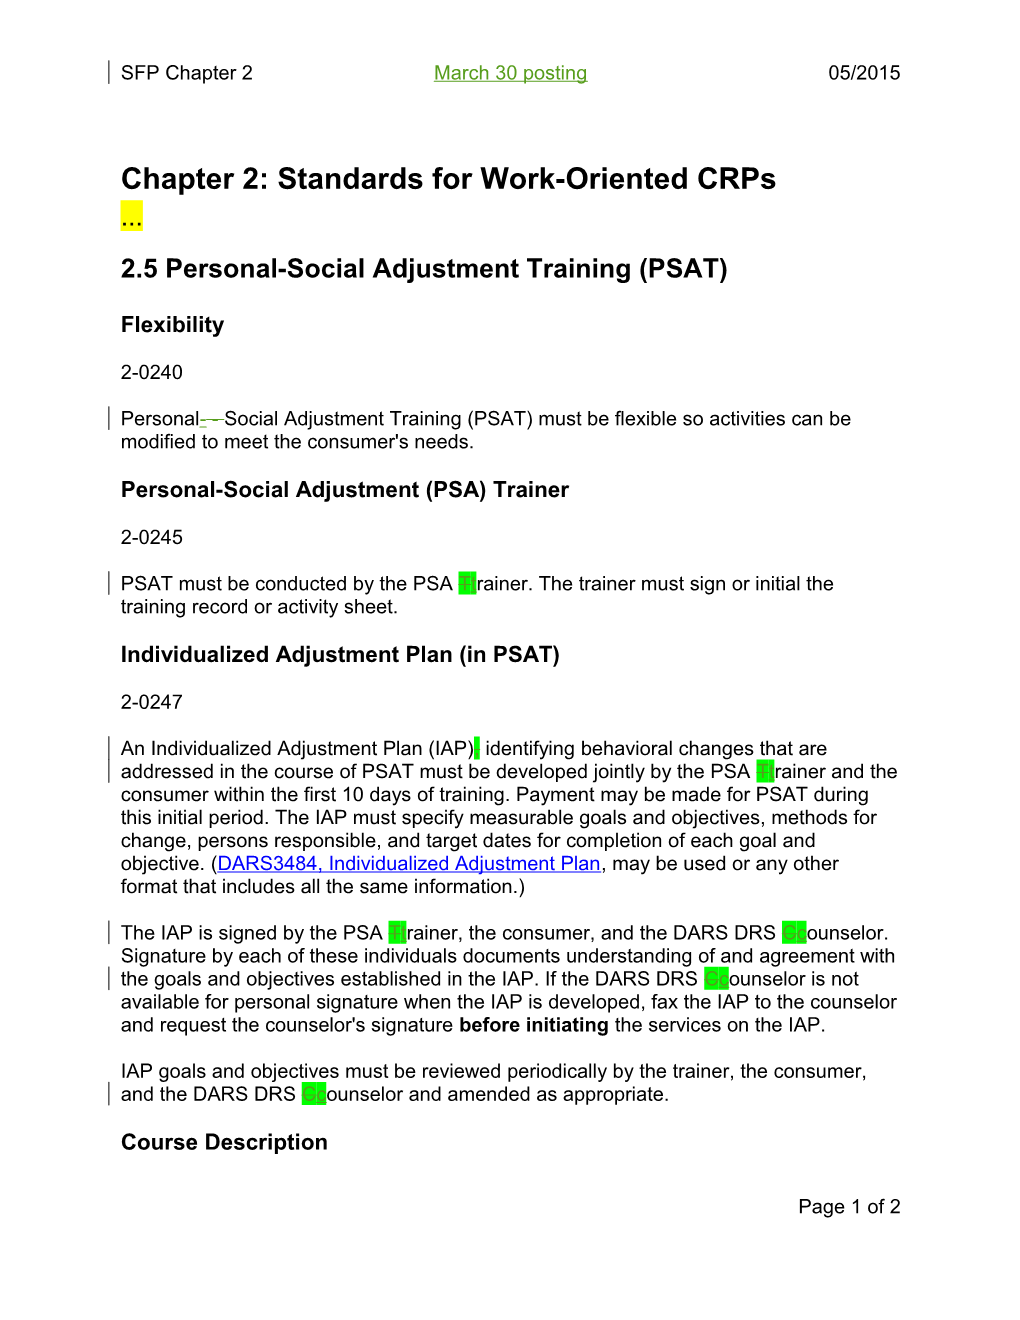 Chapter 2: Standards for Work-Oriented Crps